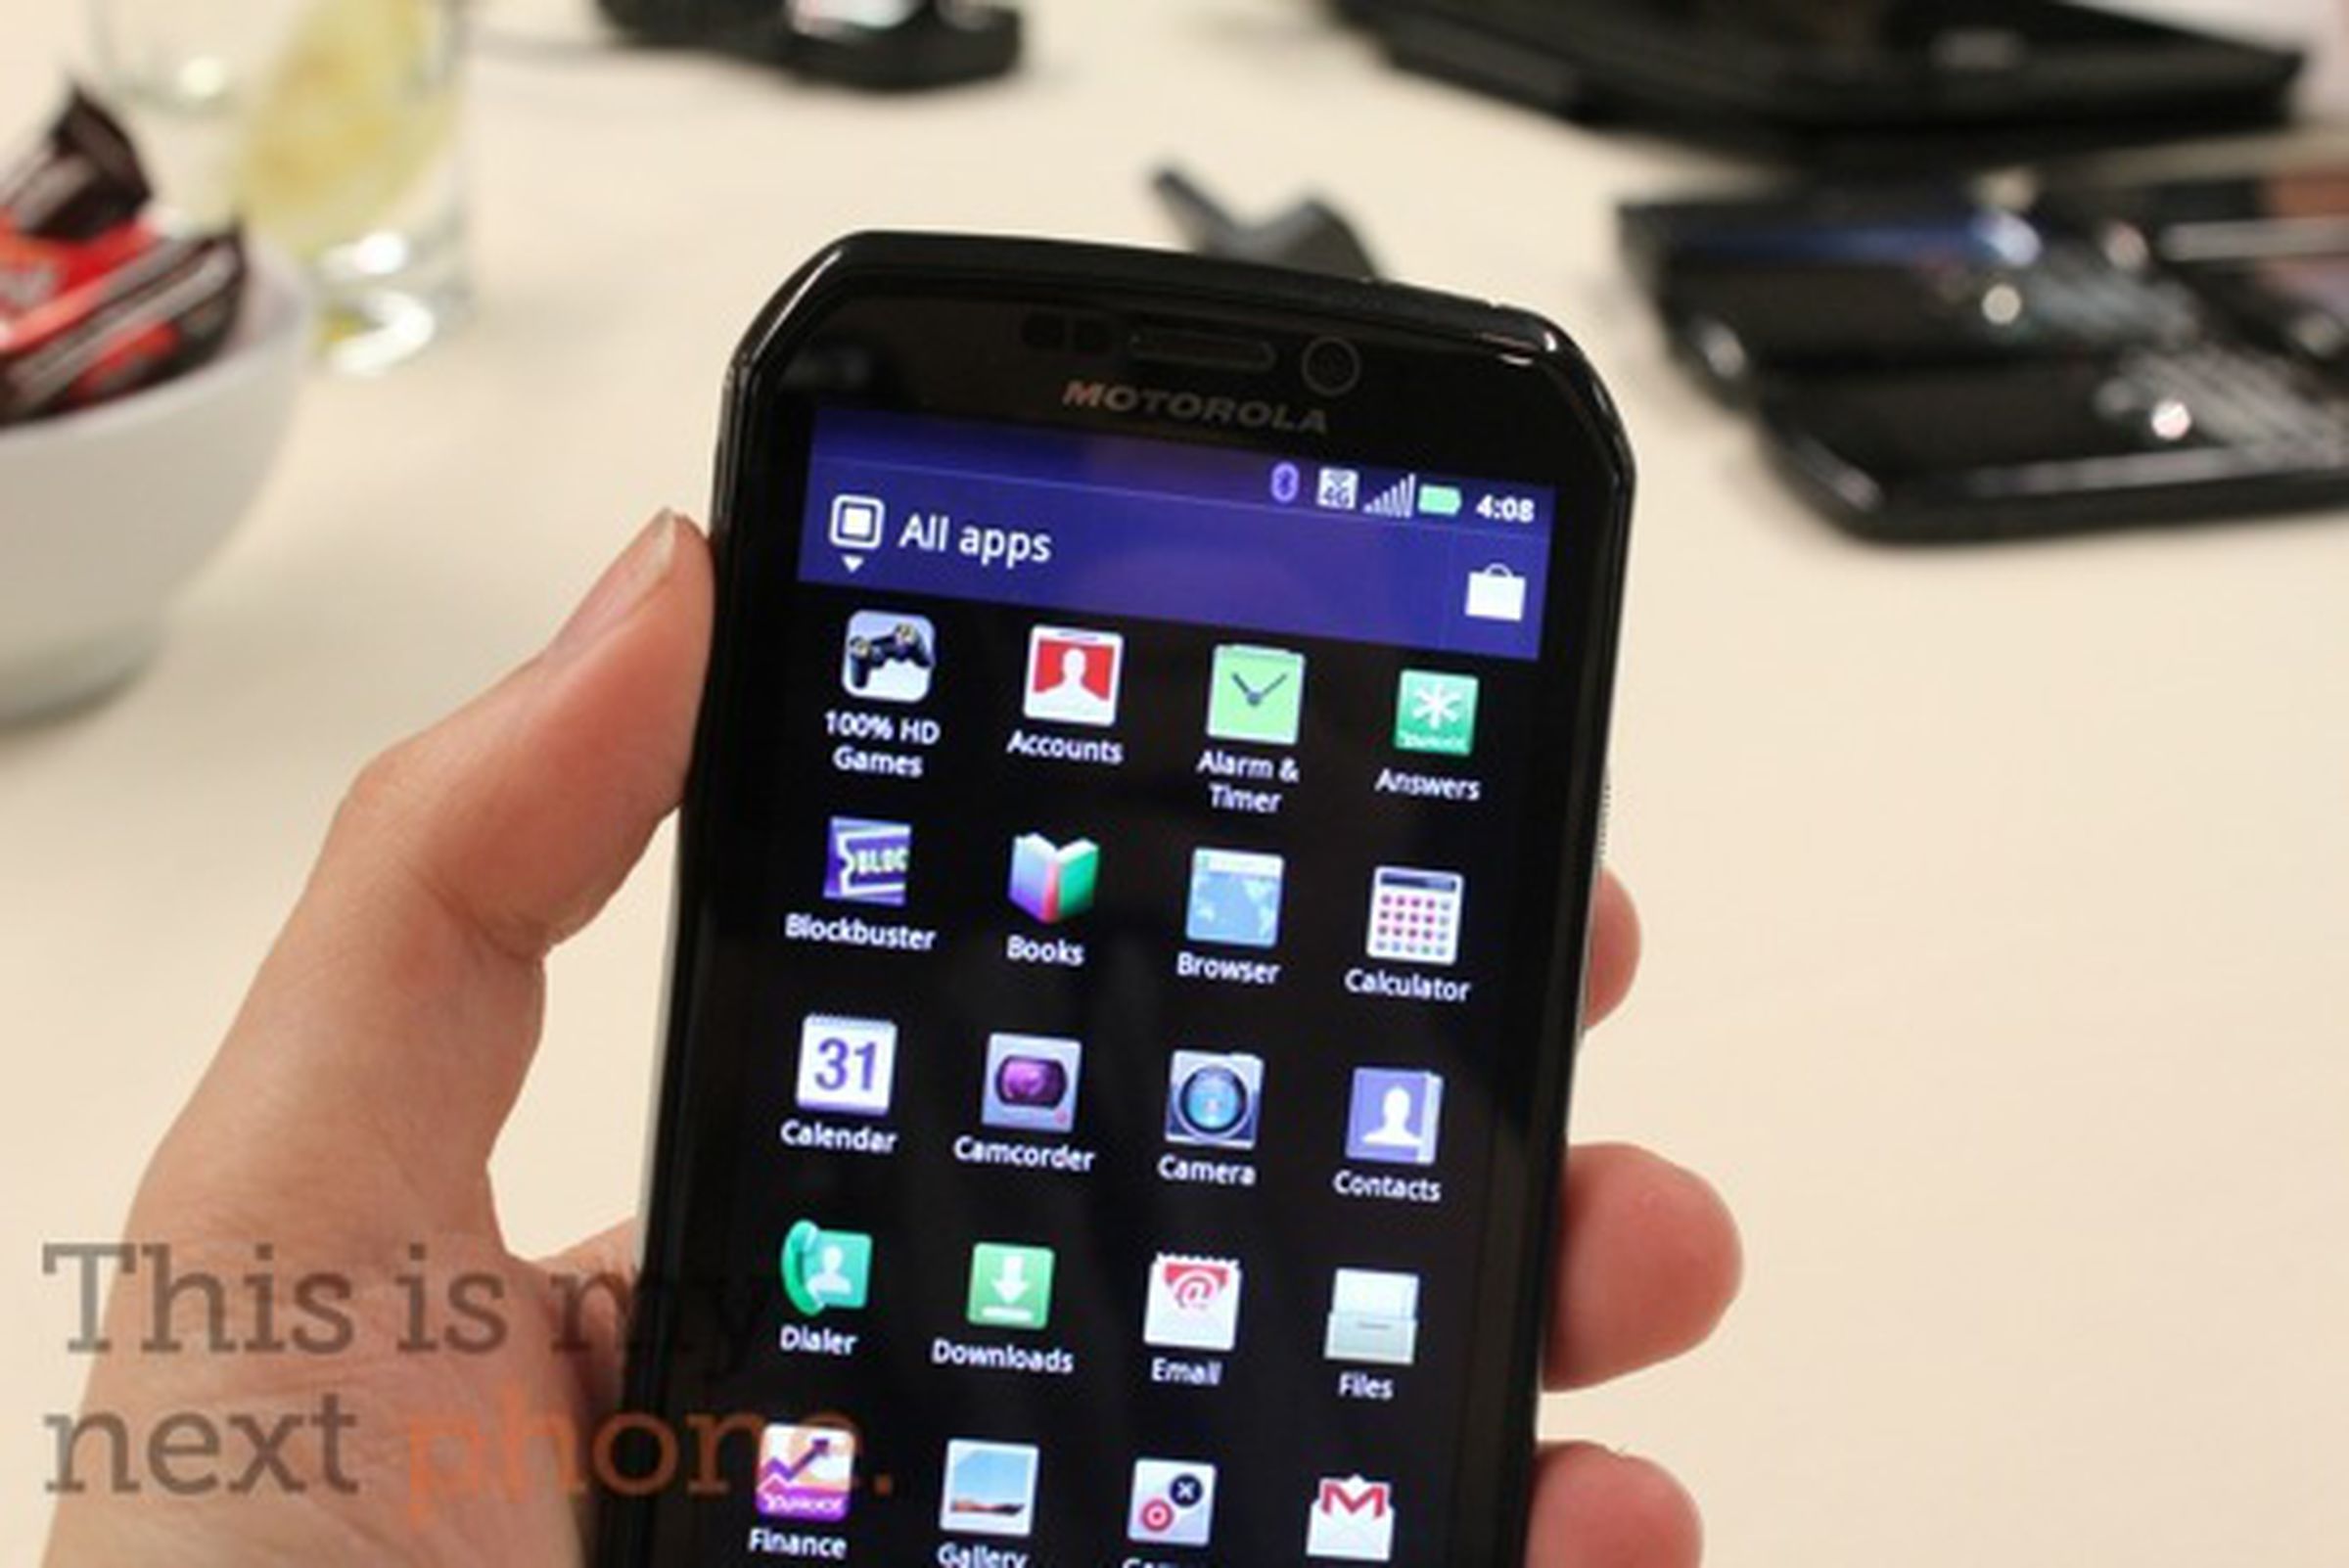 Sprint Motorola Photon 4G hands-on: 4.3-inch qHD display, Gingerbread, WiMAX, and Tegra 2